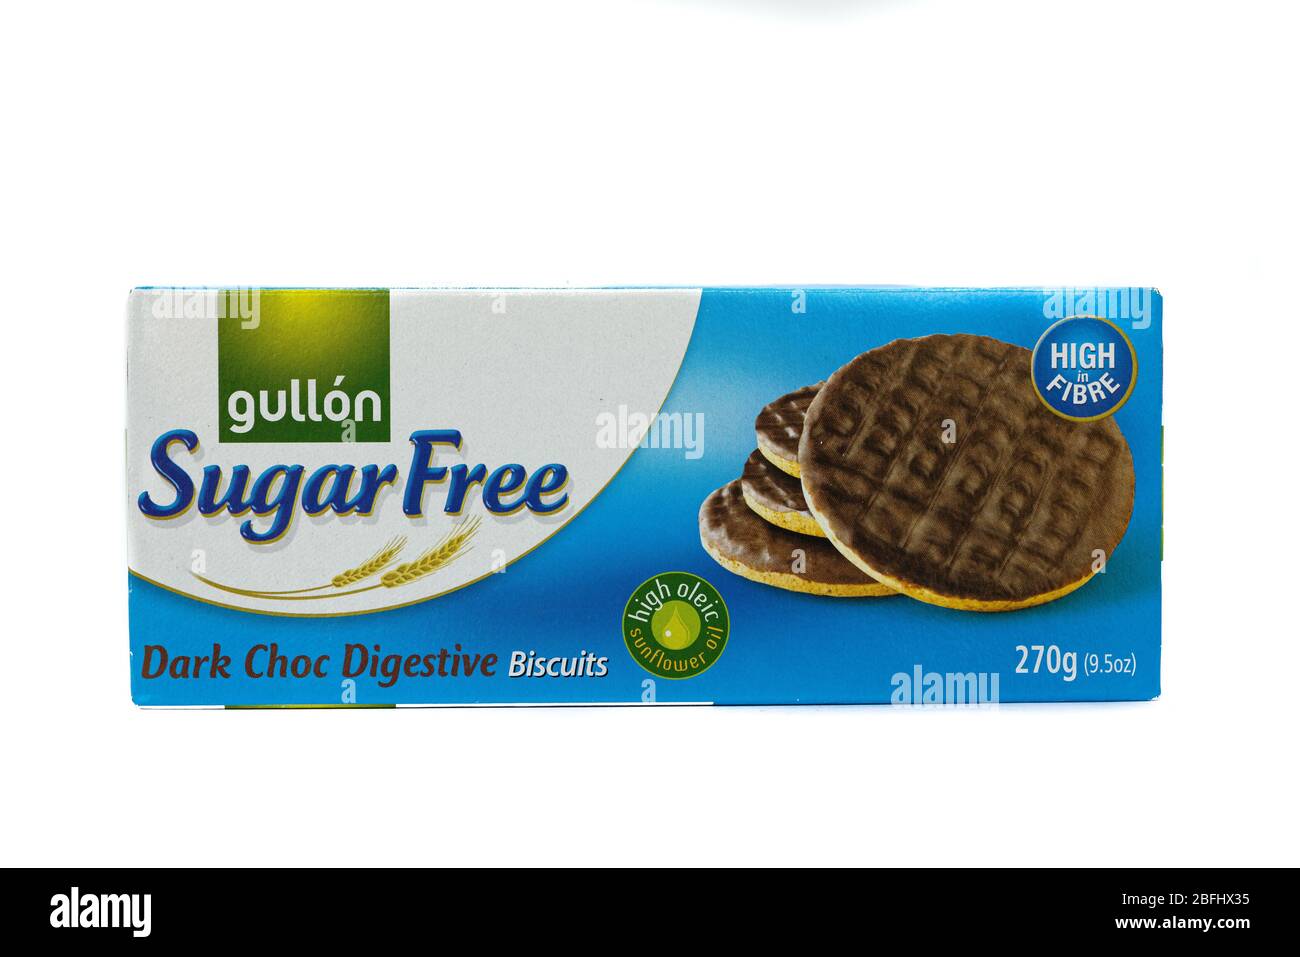 Irvine, Scotland, UK - April 18, 2020: gullon brand sugar free biscuits high in fibre and sunflower oil in recyclable packaging. Stock Photo